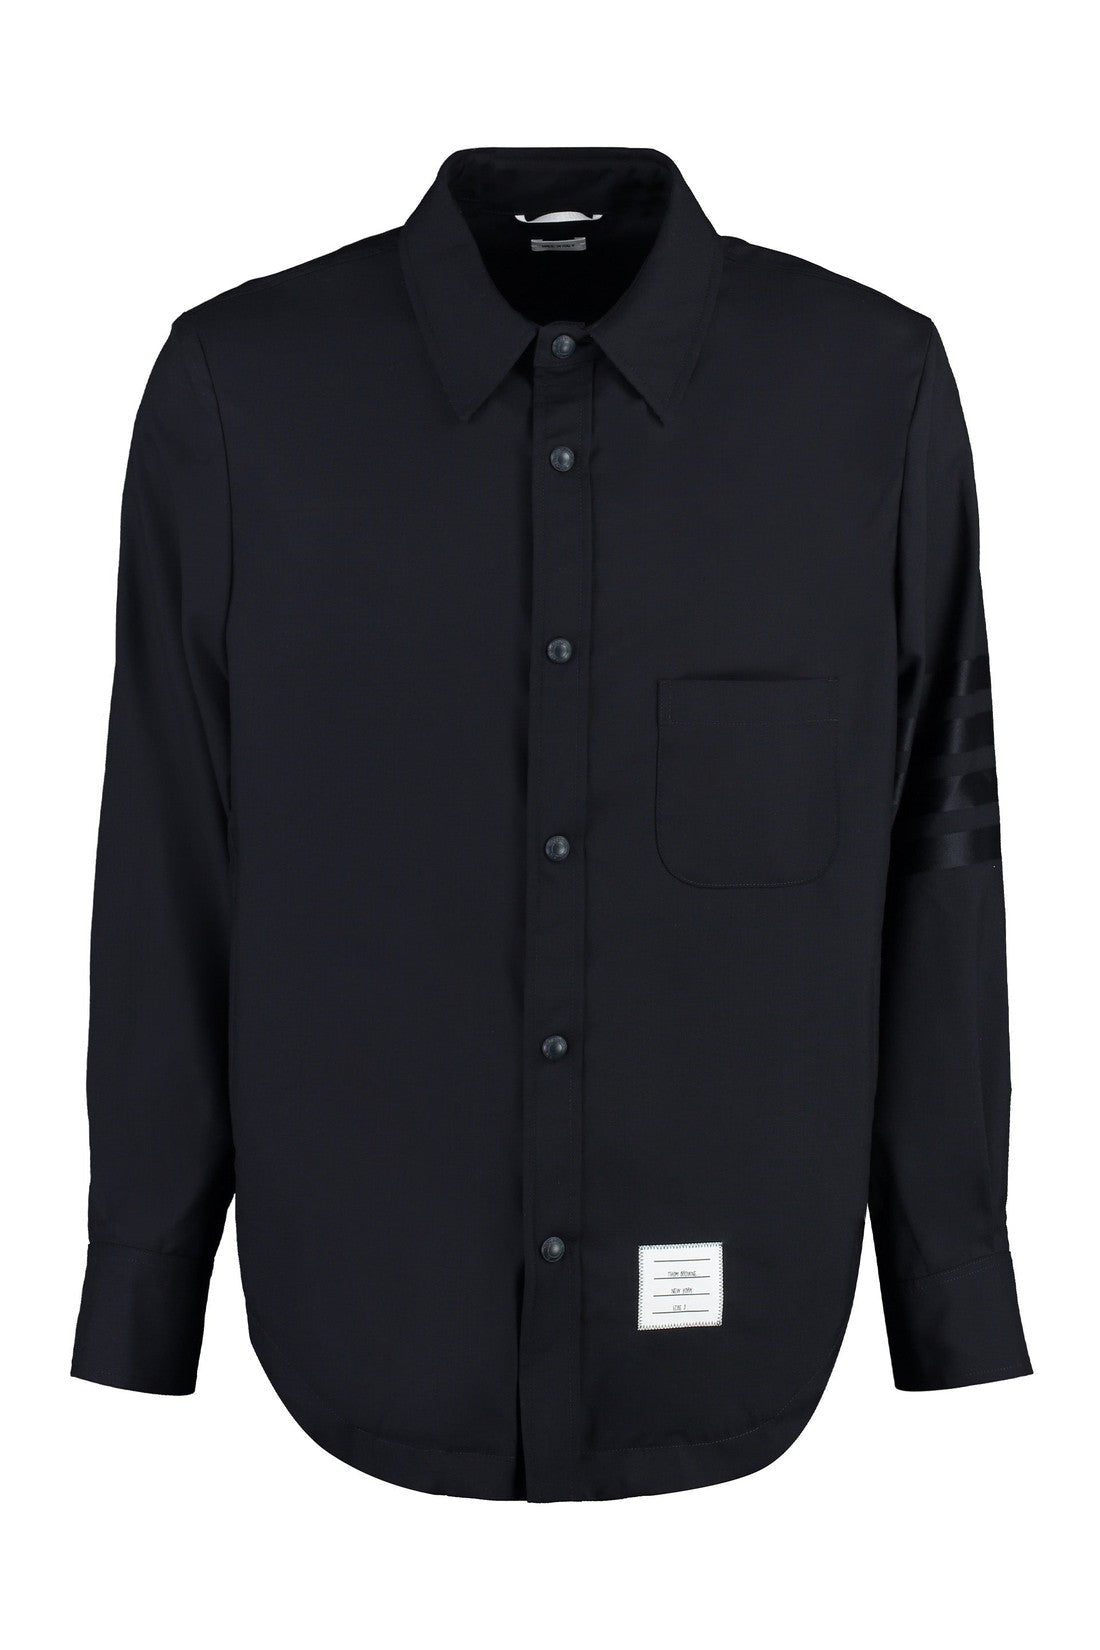 Thom Browne-OUTLET-SALE-Wool overshirt-ARCHIVIST